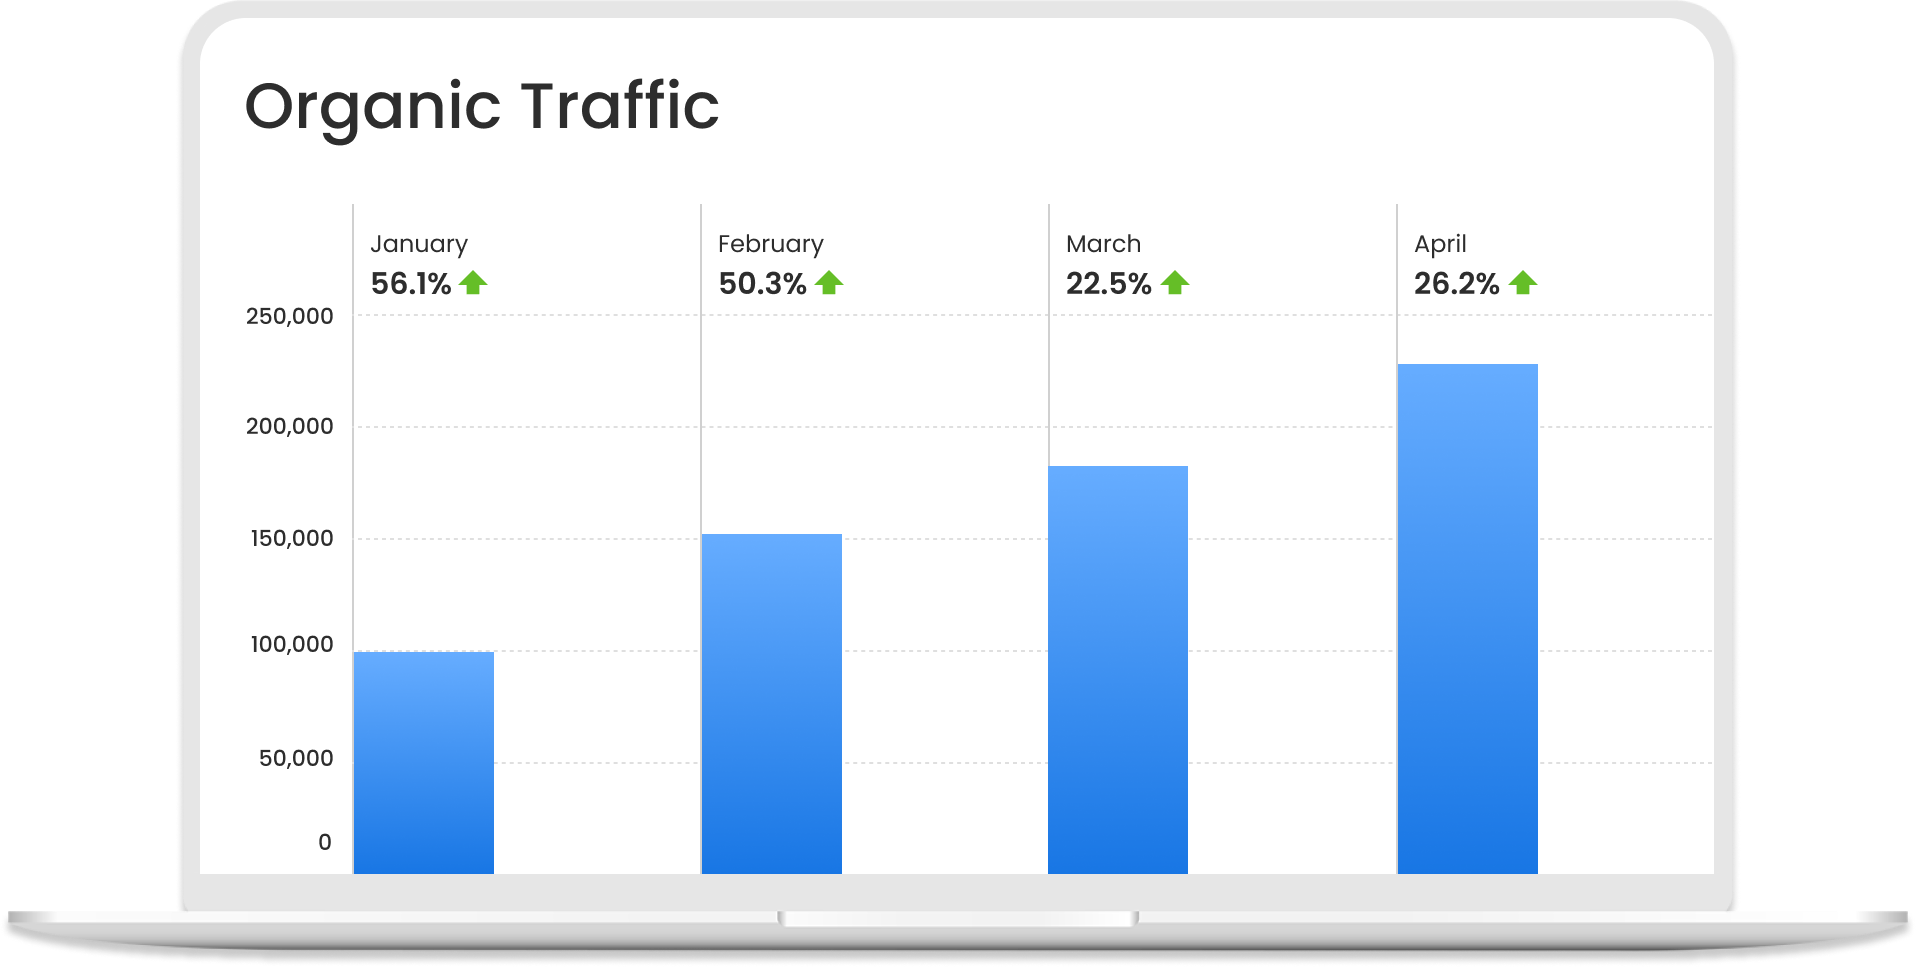 About Finest SEO Agency - Organic Traffic Graphs - Forix SEO